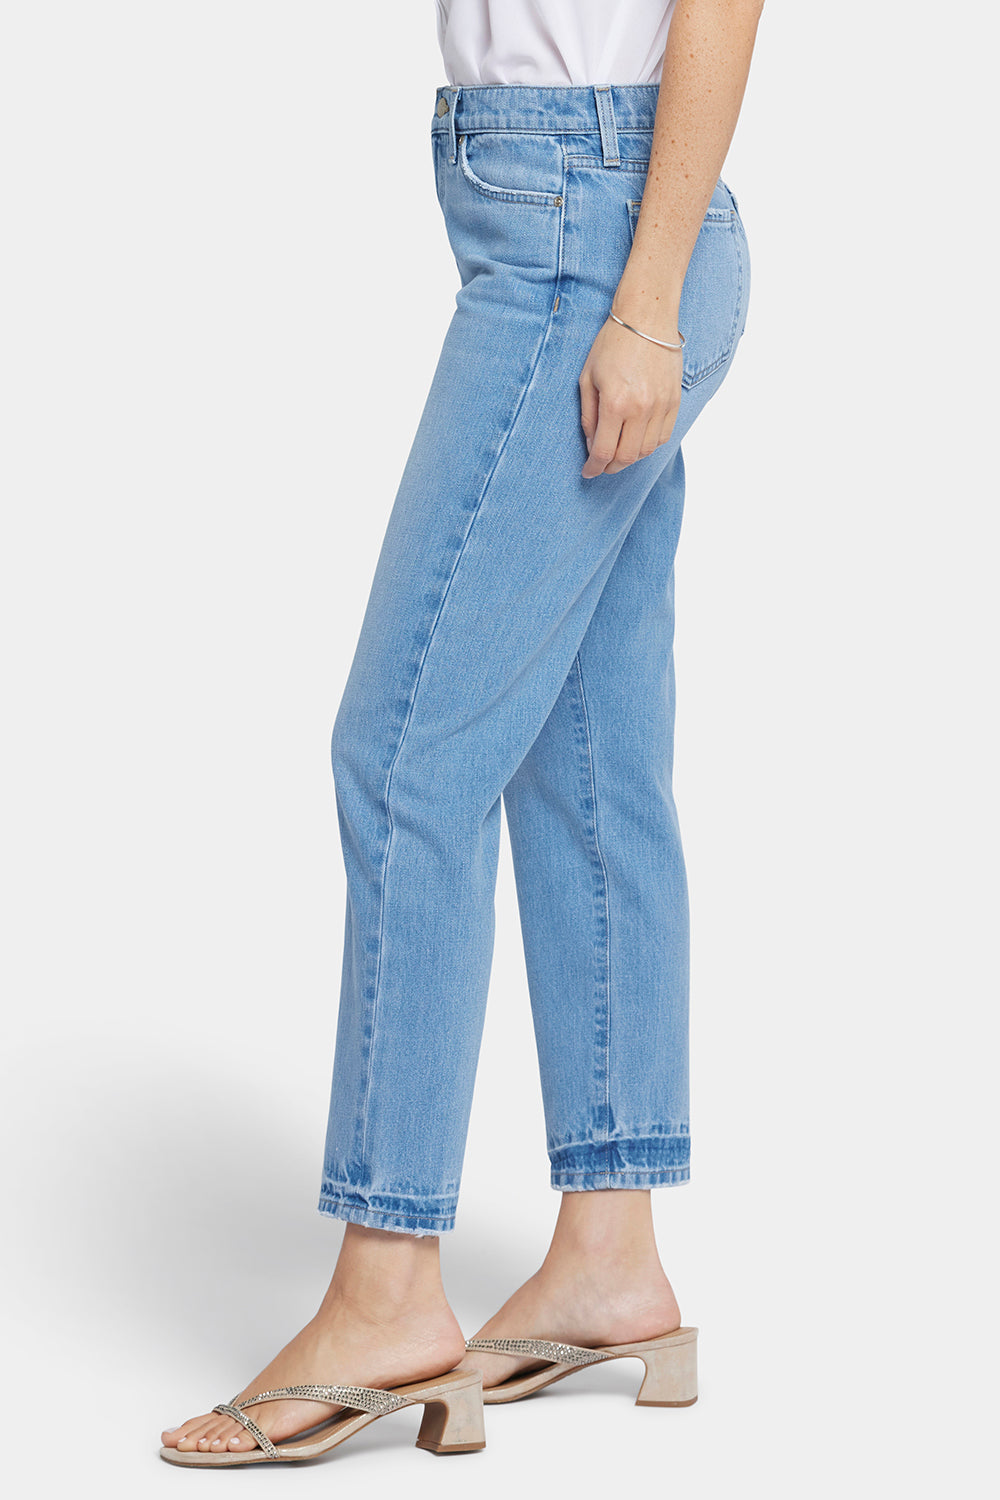 NYDJ Charlotte Relaxed Jeans レディース 65%OFF【送料無料